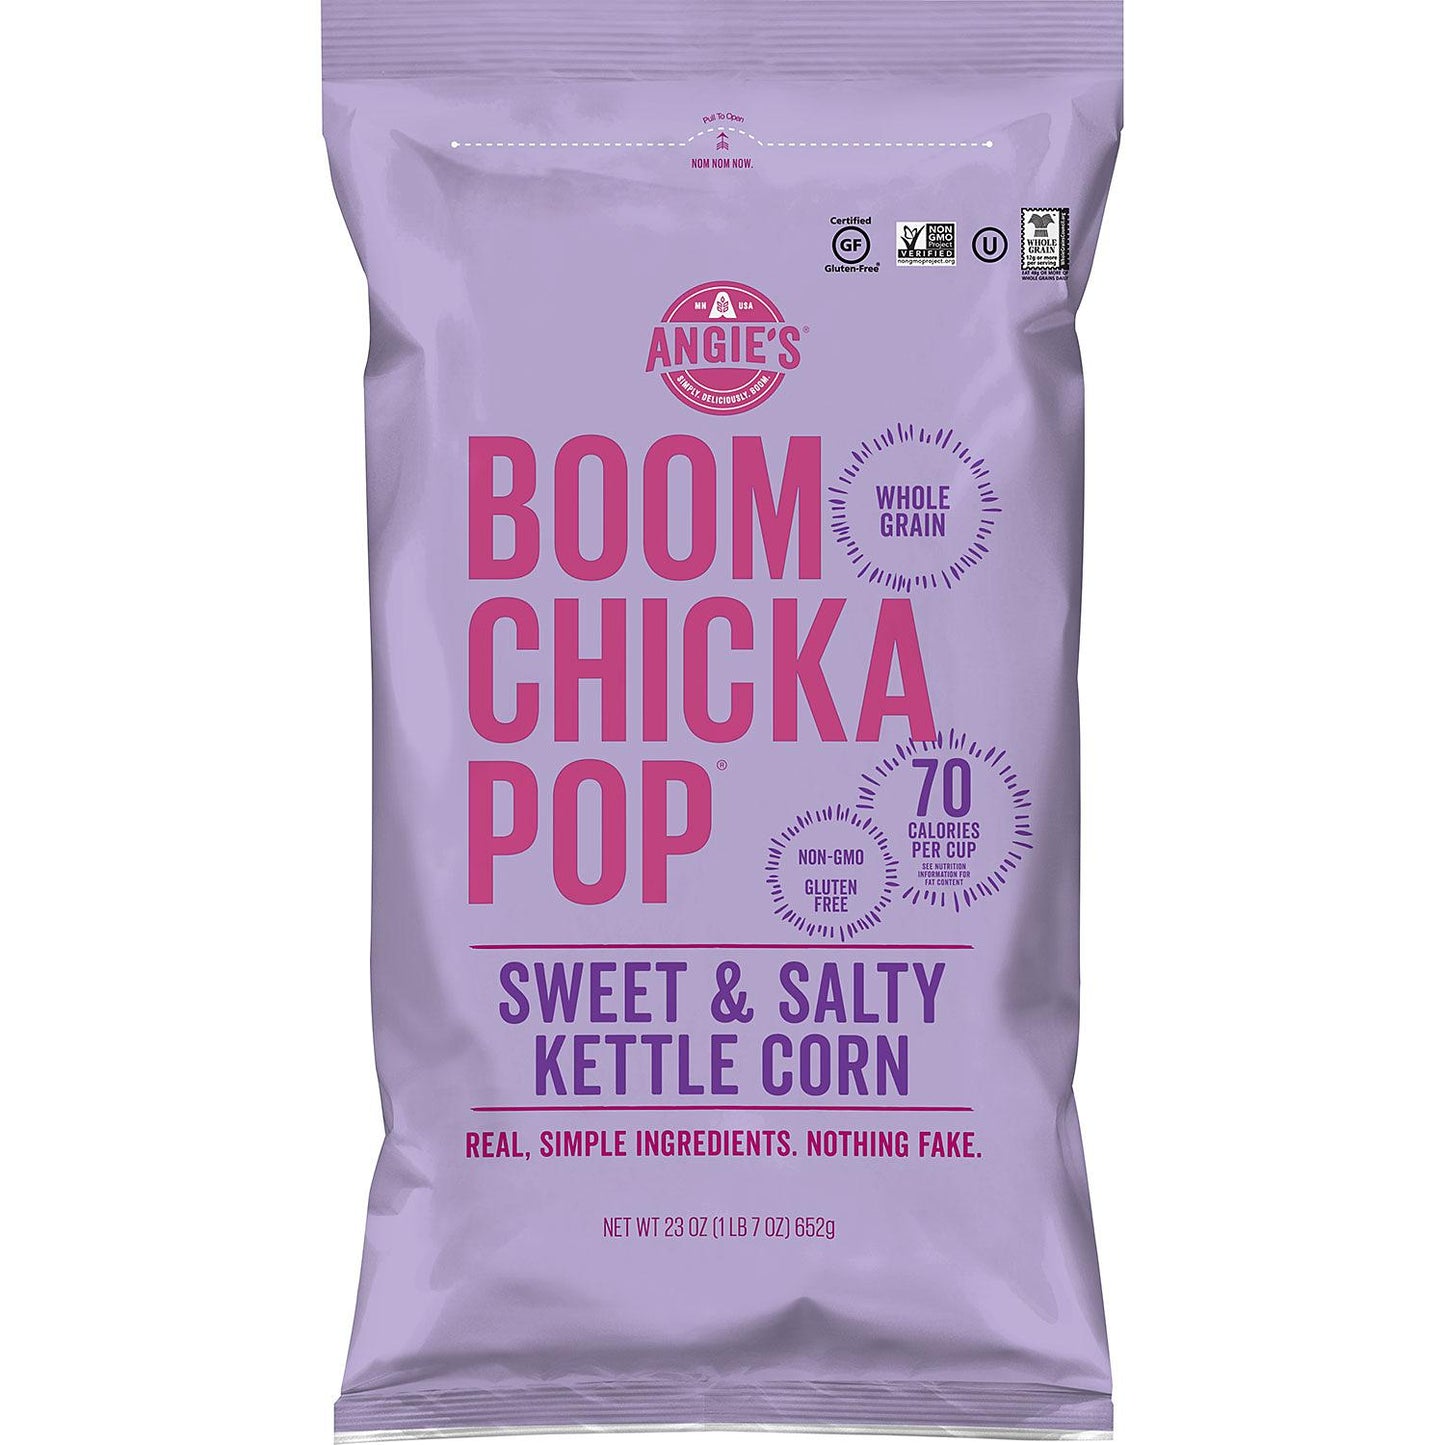 Angie's Boom Chicka Pop Sweet and Salty Kettle Corn (25 oz.)